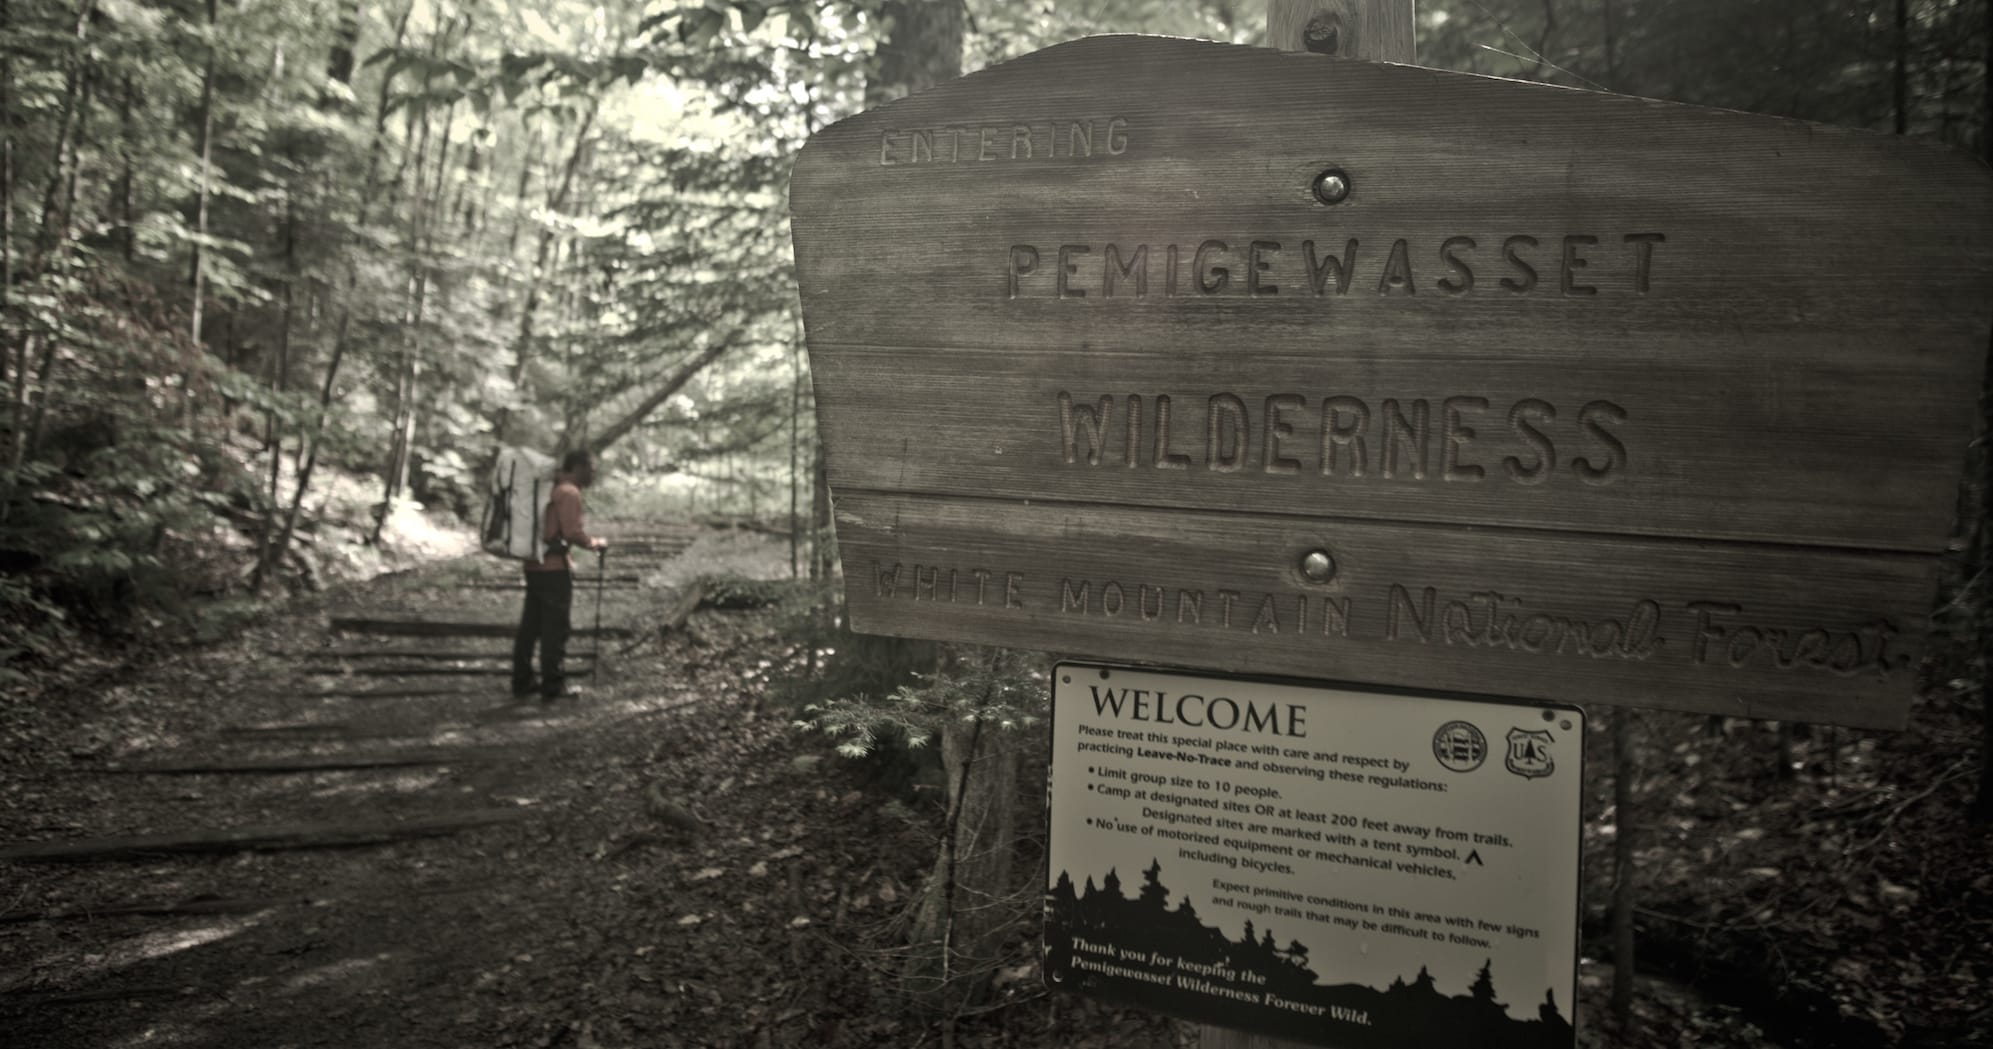 Wooden sign for Pemigewaset Wilderness in New Hampshire